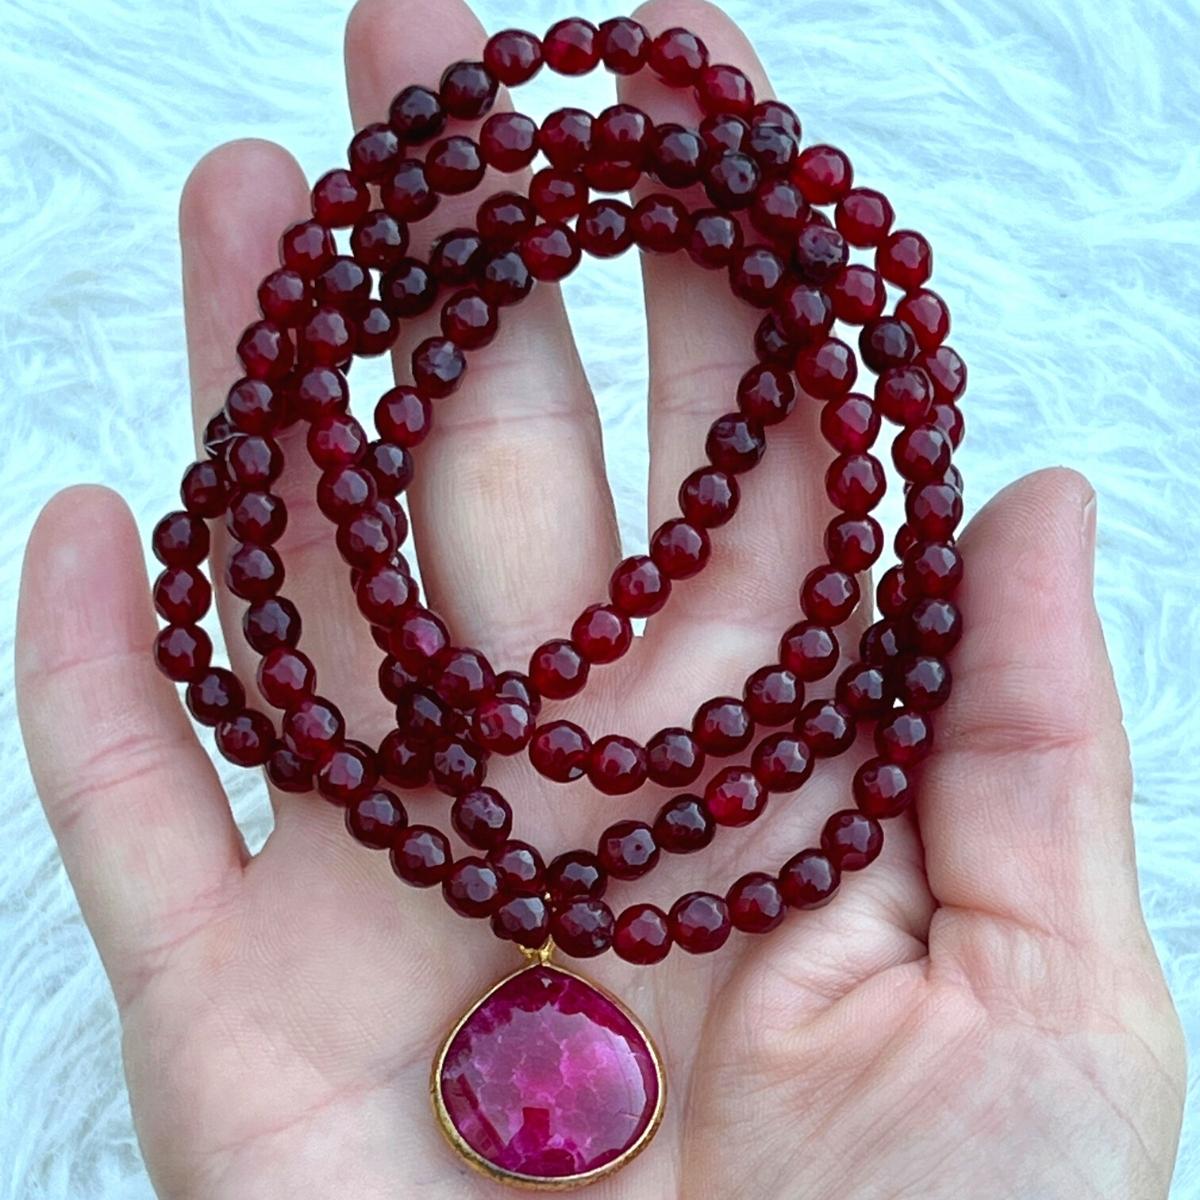 Honor and Compassion Ruby Necklace with Red Agate. ONLY 14 AVAILABLE. This is truly a meaningful piece and supports Charity. 